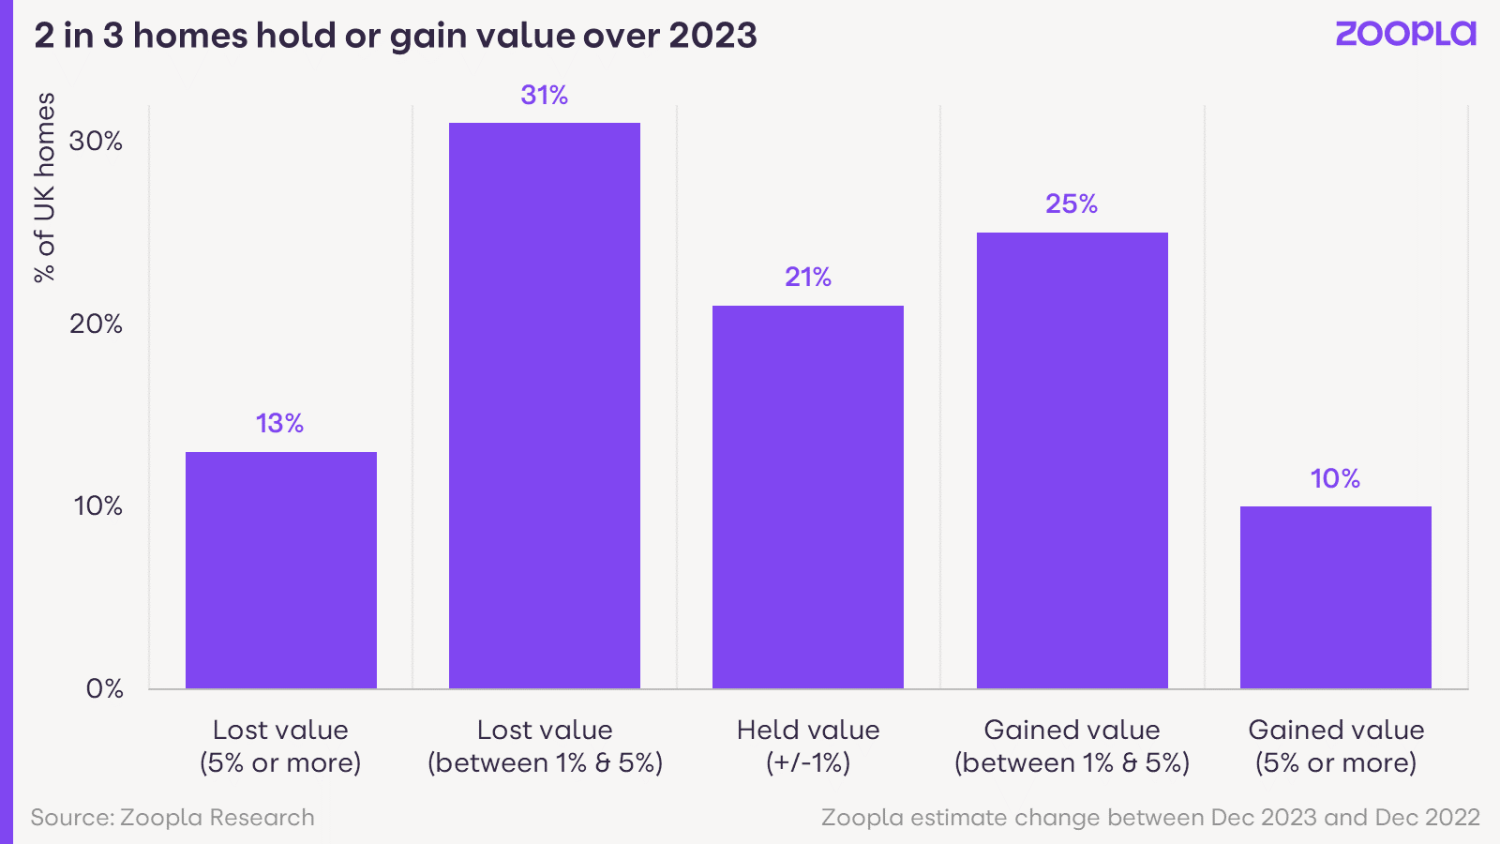 Graph showing 2 in 3 homes hold or gain value over 2023